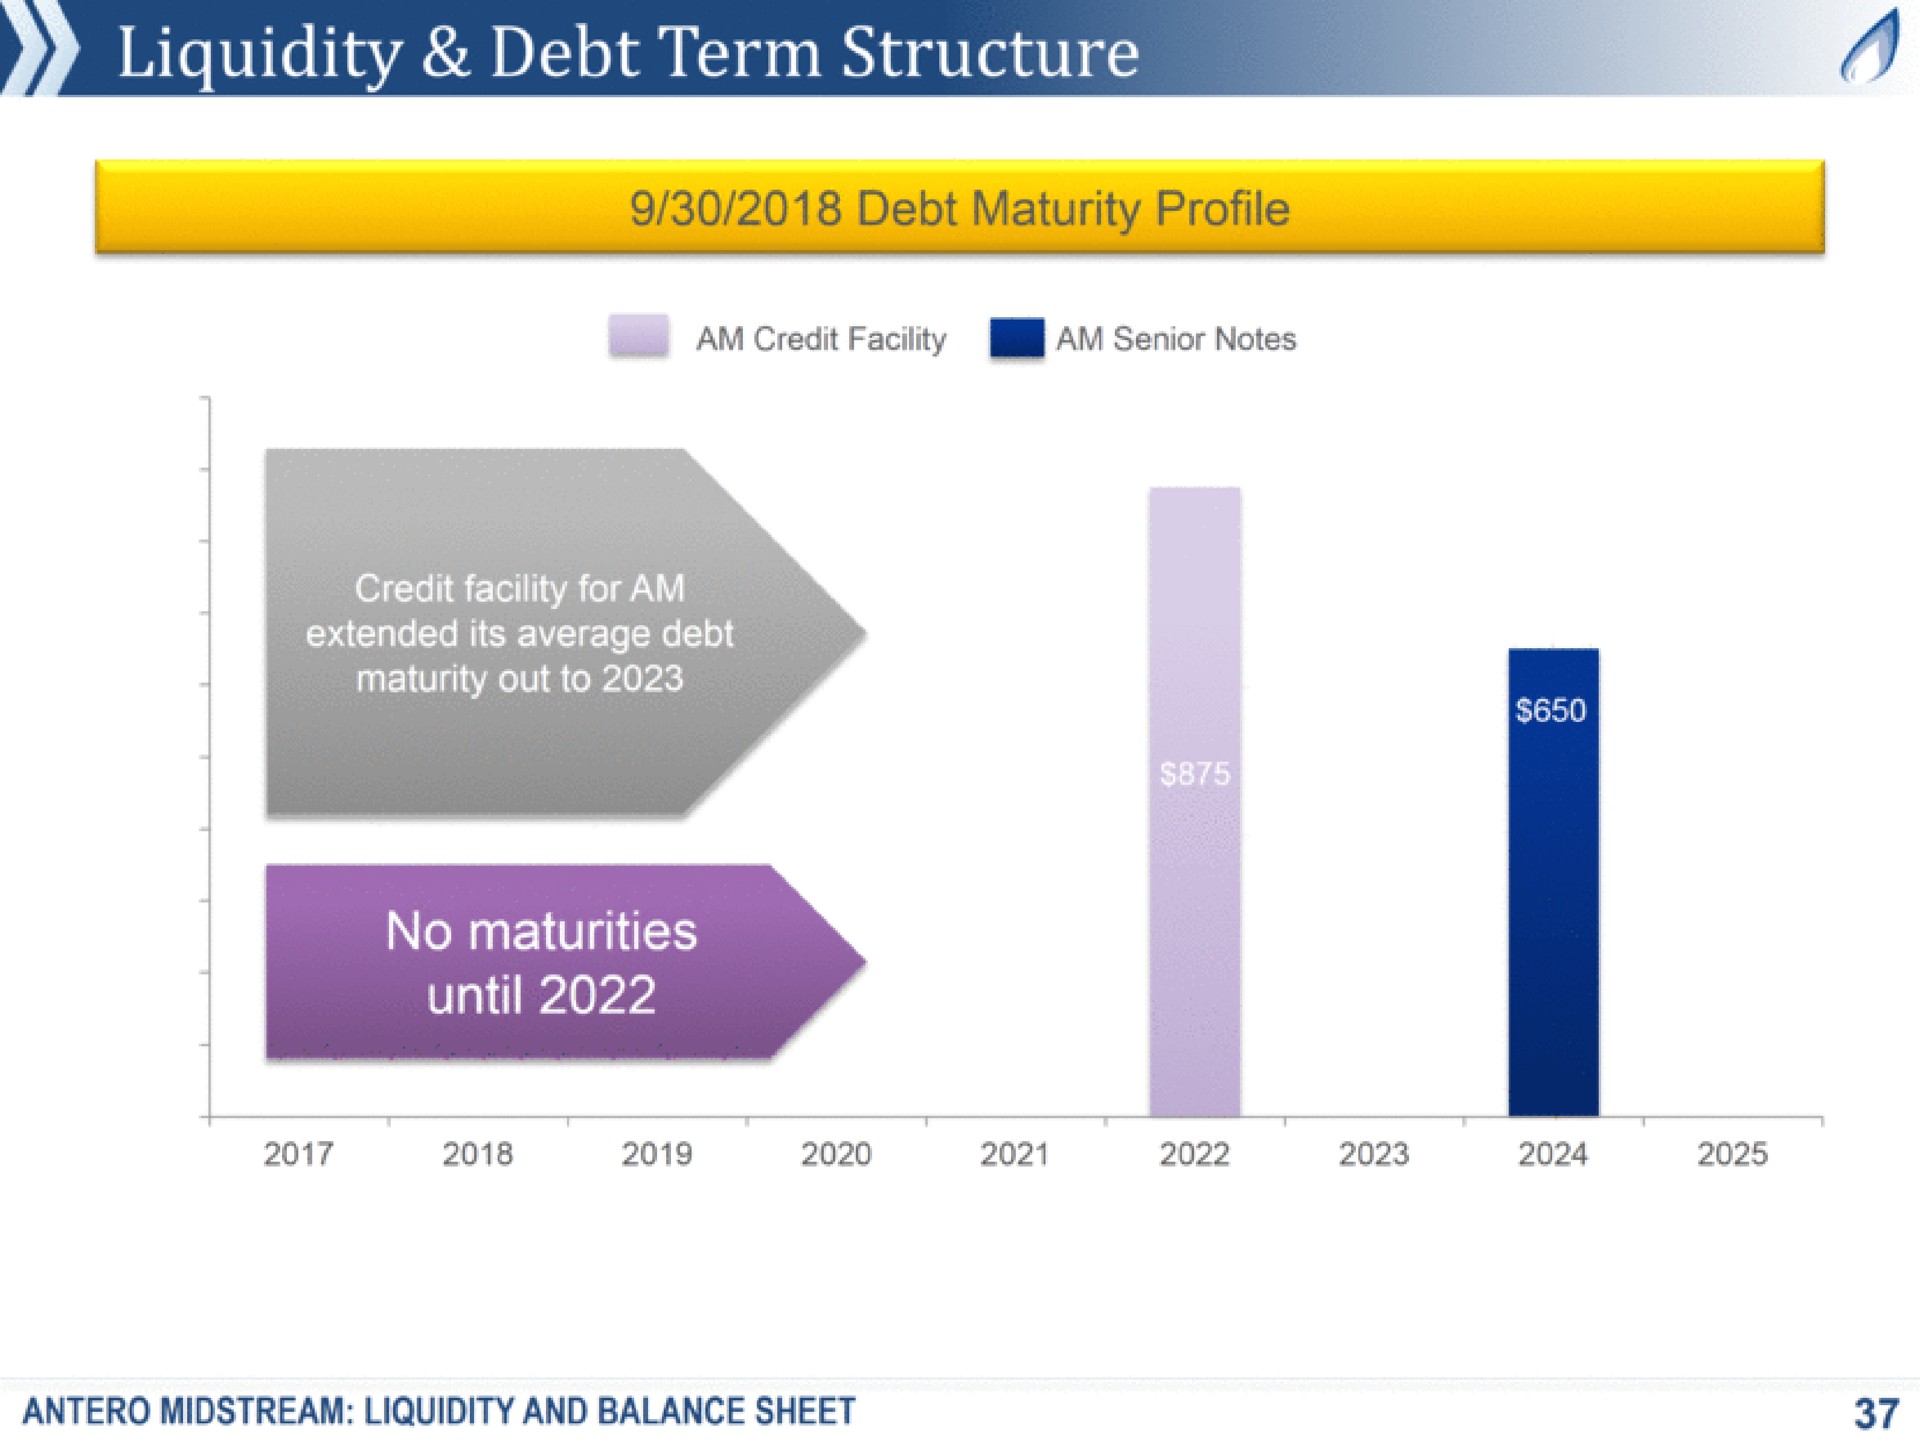 liquidity debt term structure a oam credit facility pore am senior notes credit facility for am extended its average debt maturity out to no maturities until midstream liquidity and balance sheet | Antero Midstream Partners